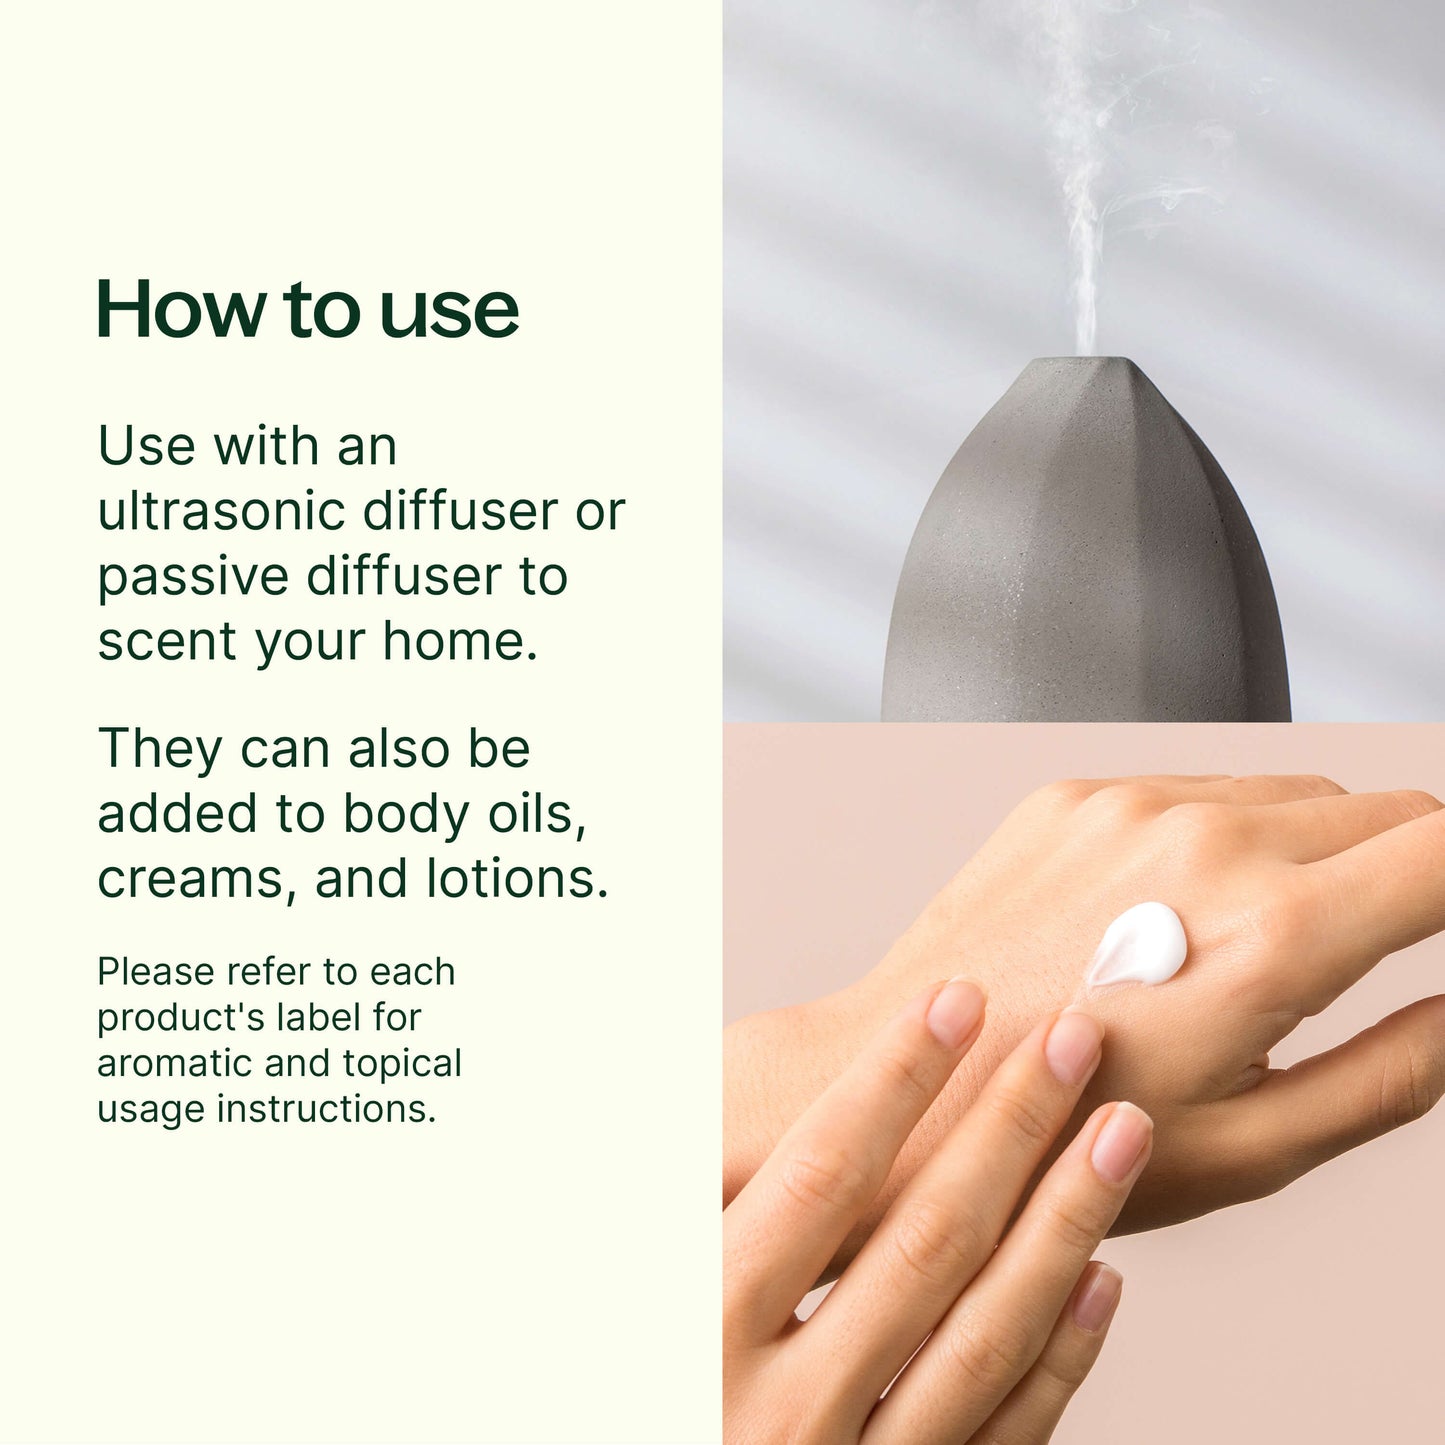 how to use: use with an ultrasonic diffuser or passive diffuser to scent your home. They can also be added to body oils, creams and lotions. Please refer to each product's label for aromatic and topical usage instructions